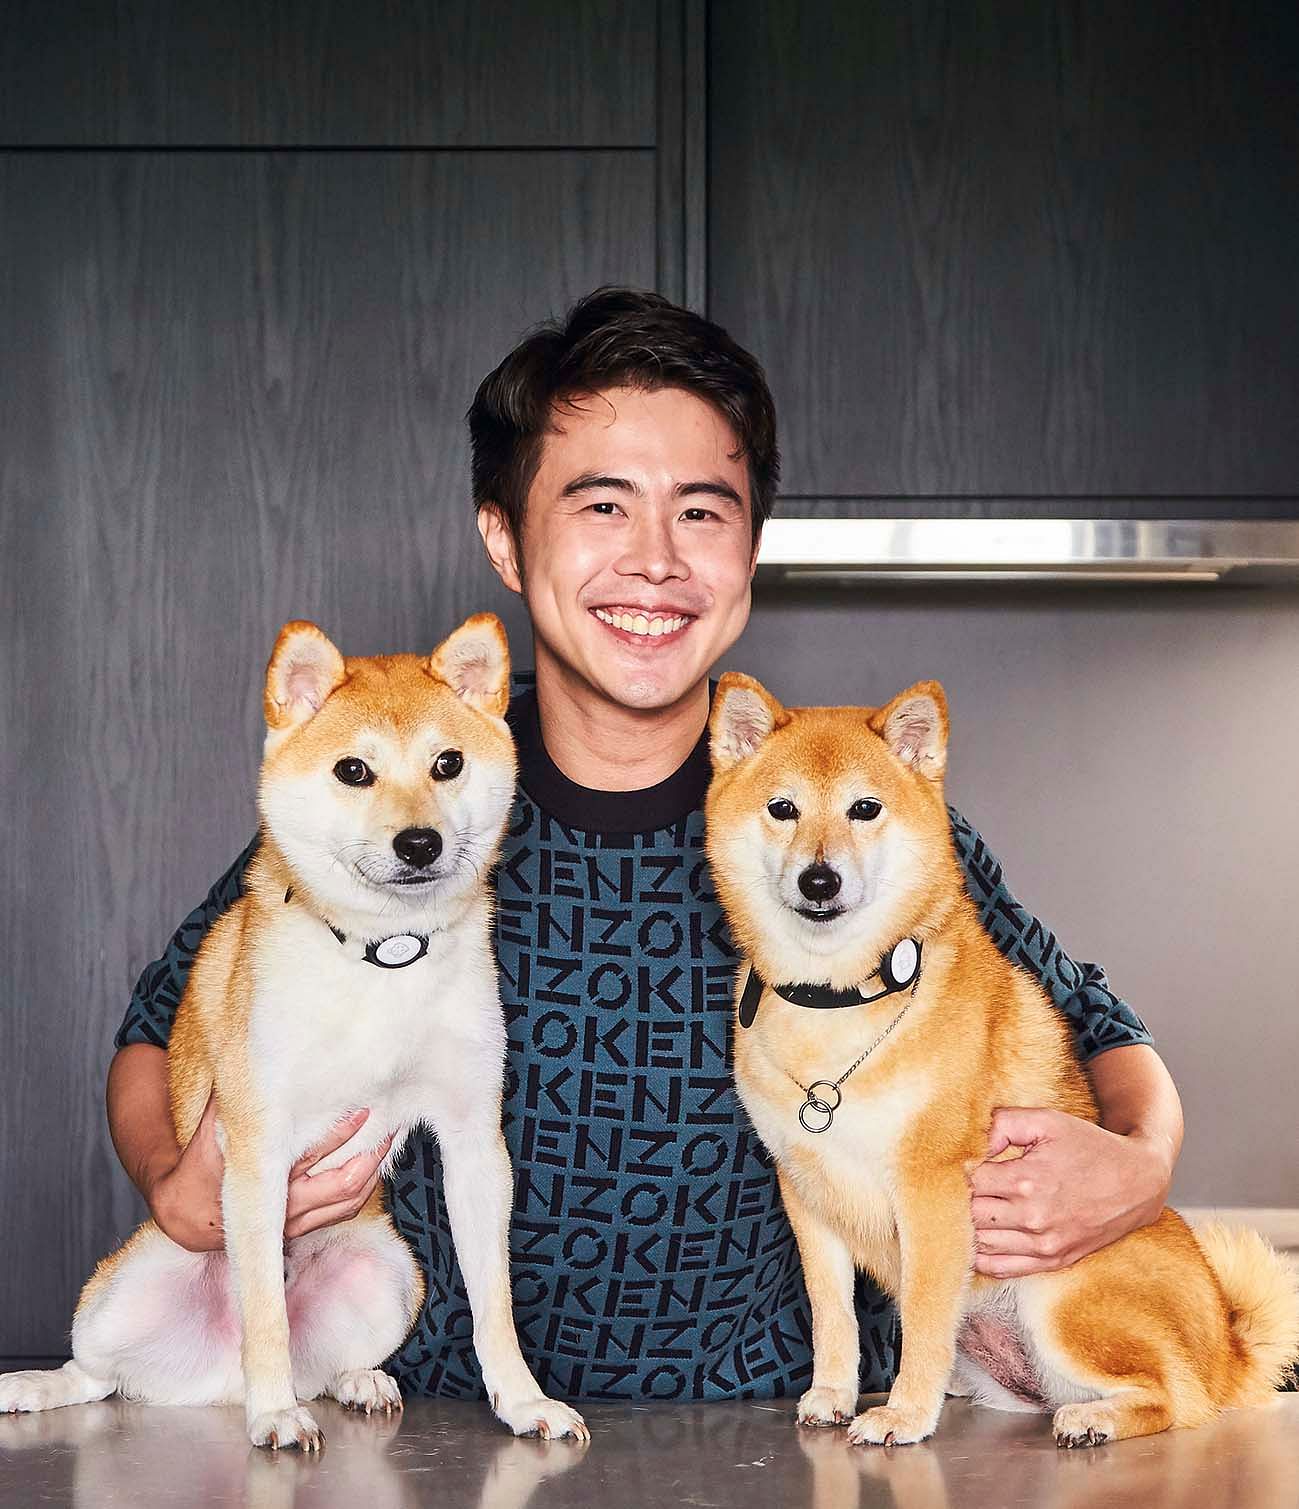 The 36-year-old entrepreneur, Clive Choo, in his 2-bedroom condominium in Siglap, pictured with his two dogs, Miwa and Yoshi